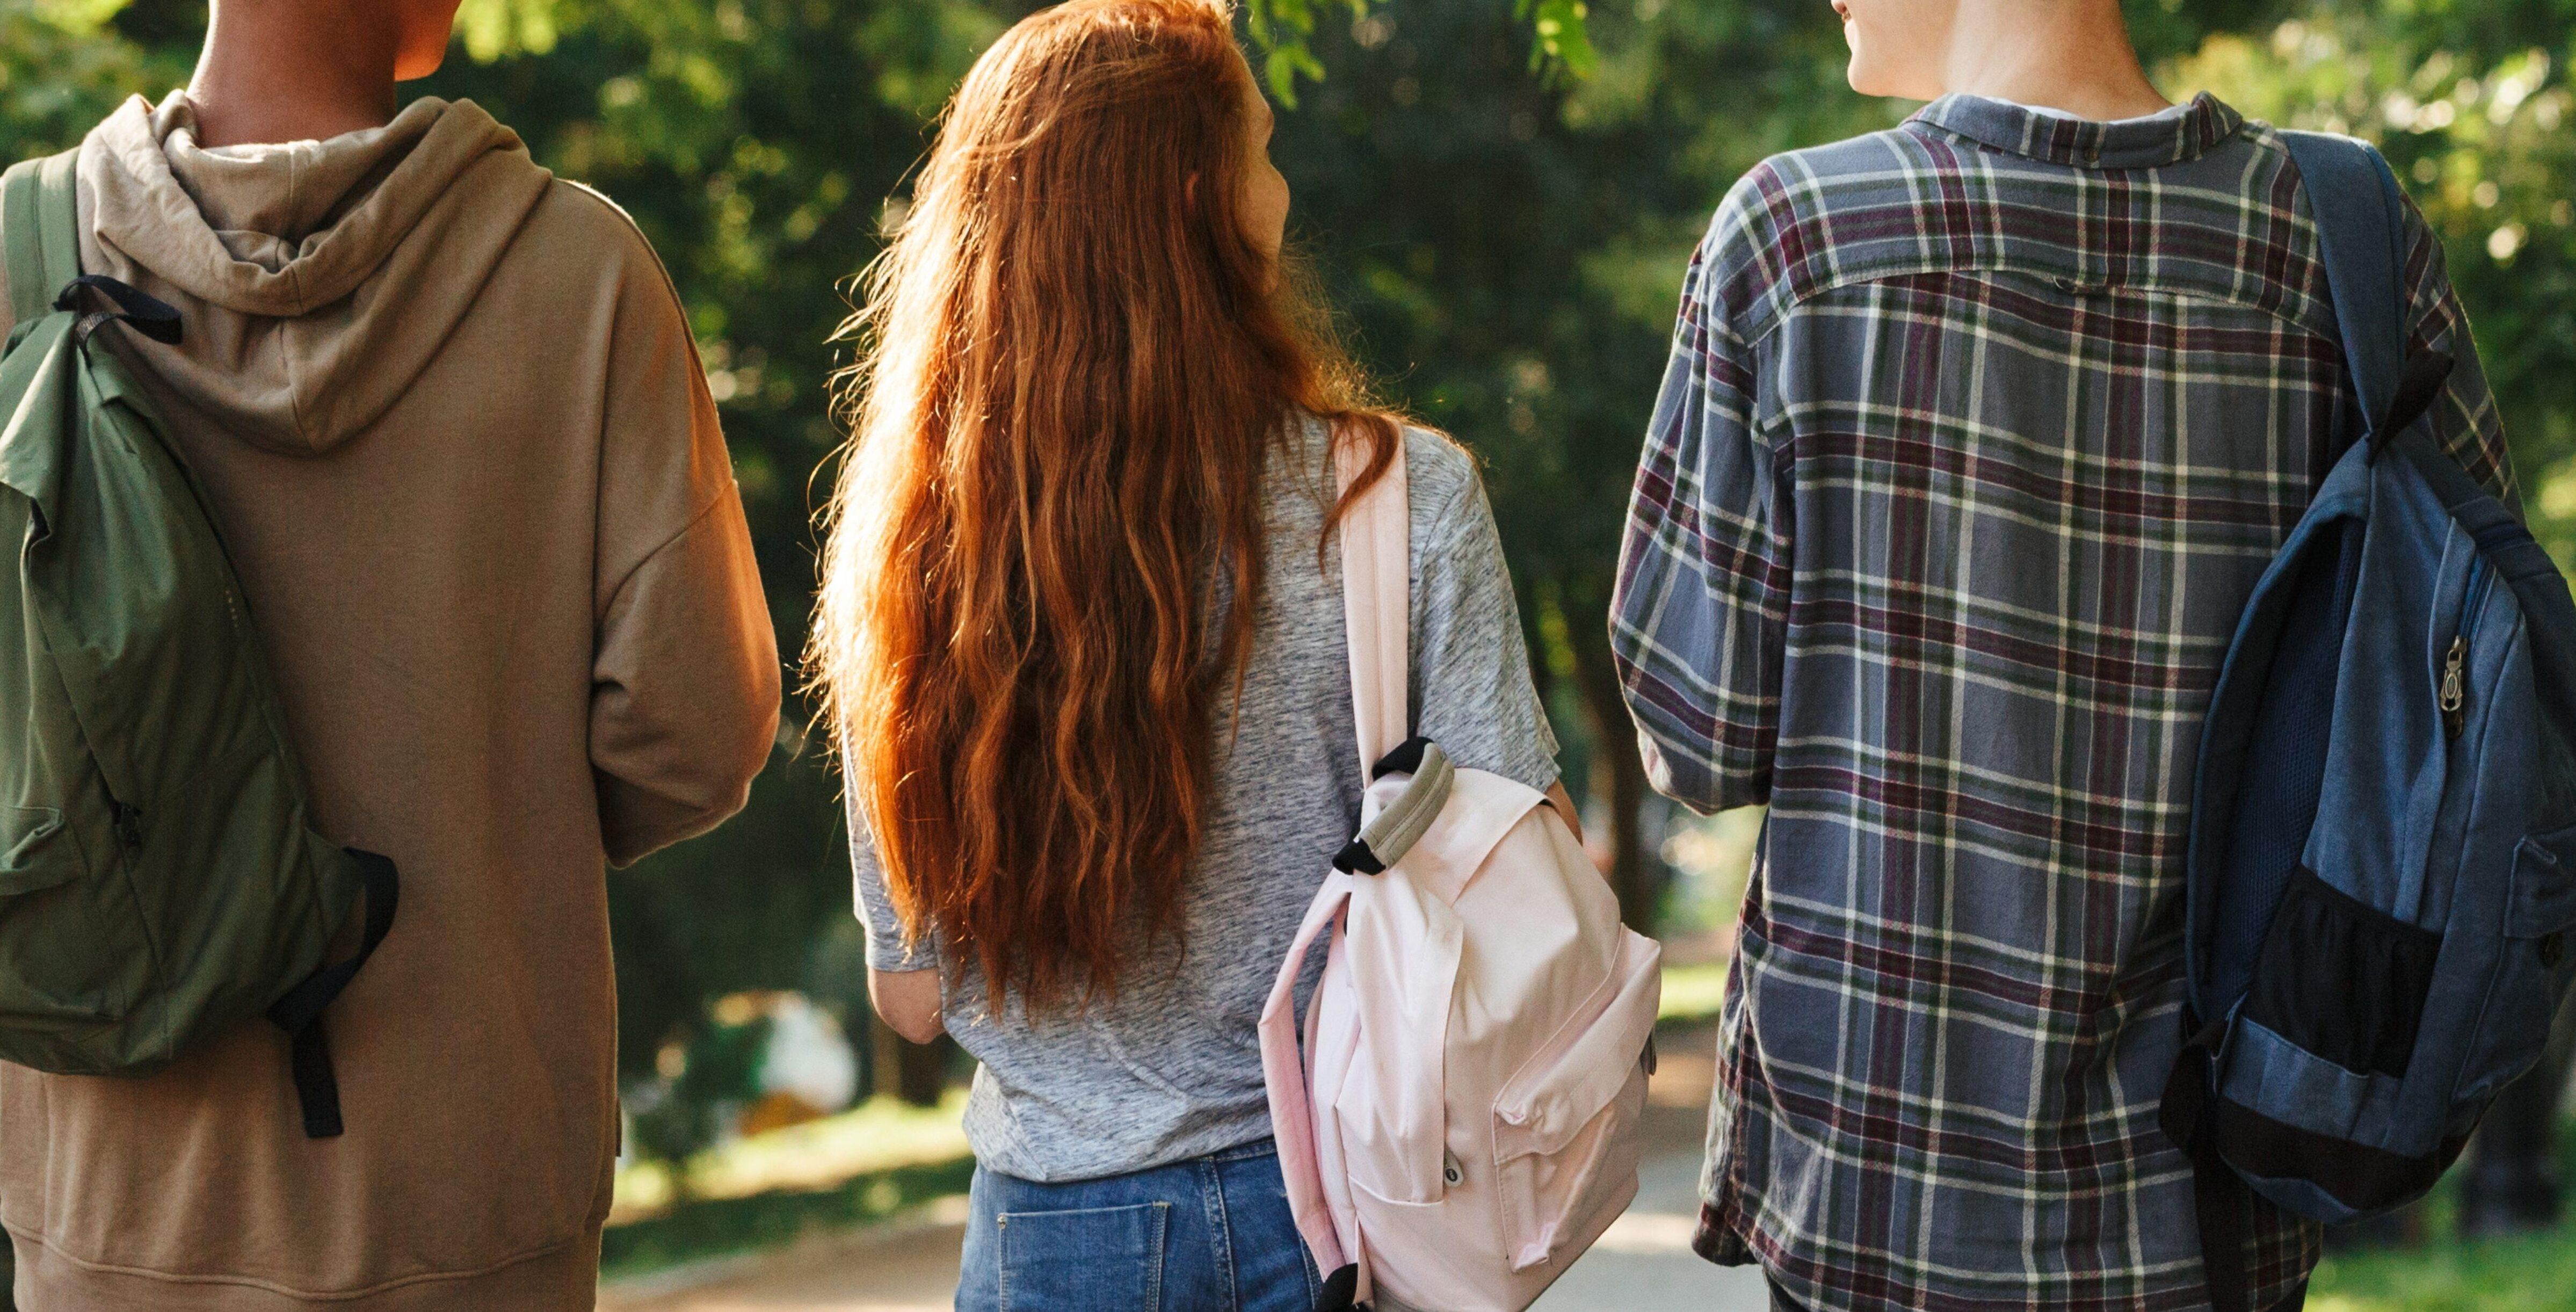 Three teenagers walking together in a park